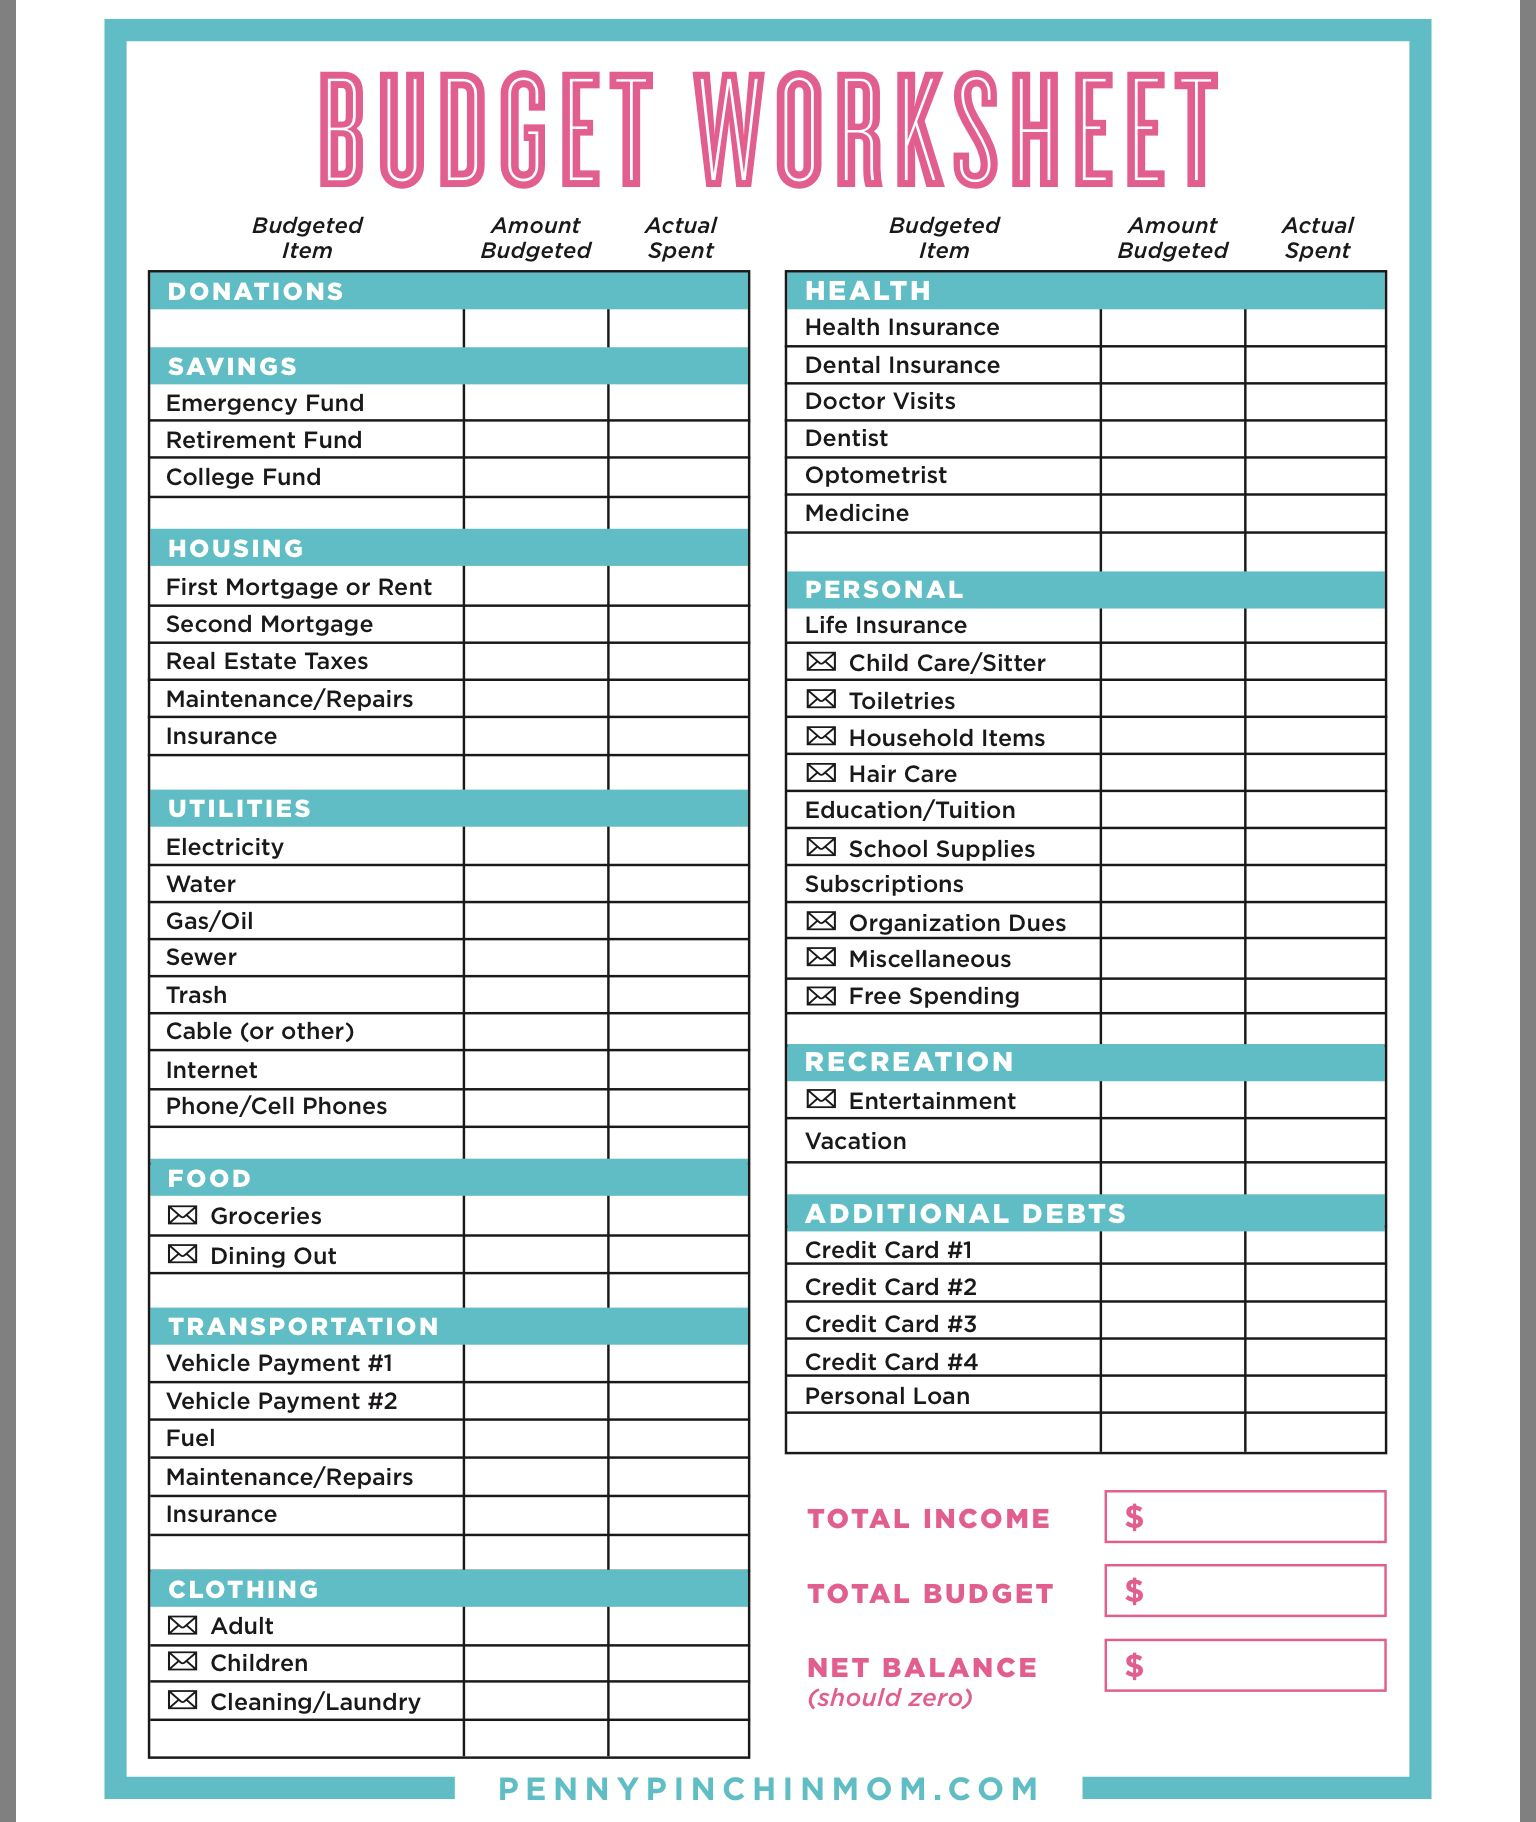 Monthly Expenses Image By AMI Howard Budgeting Worksheets Emergency 